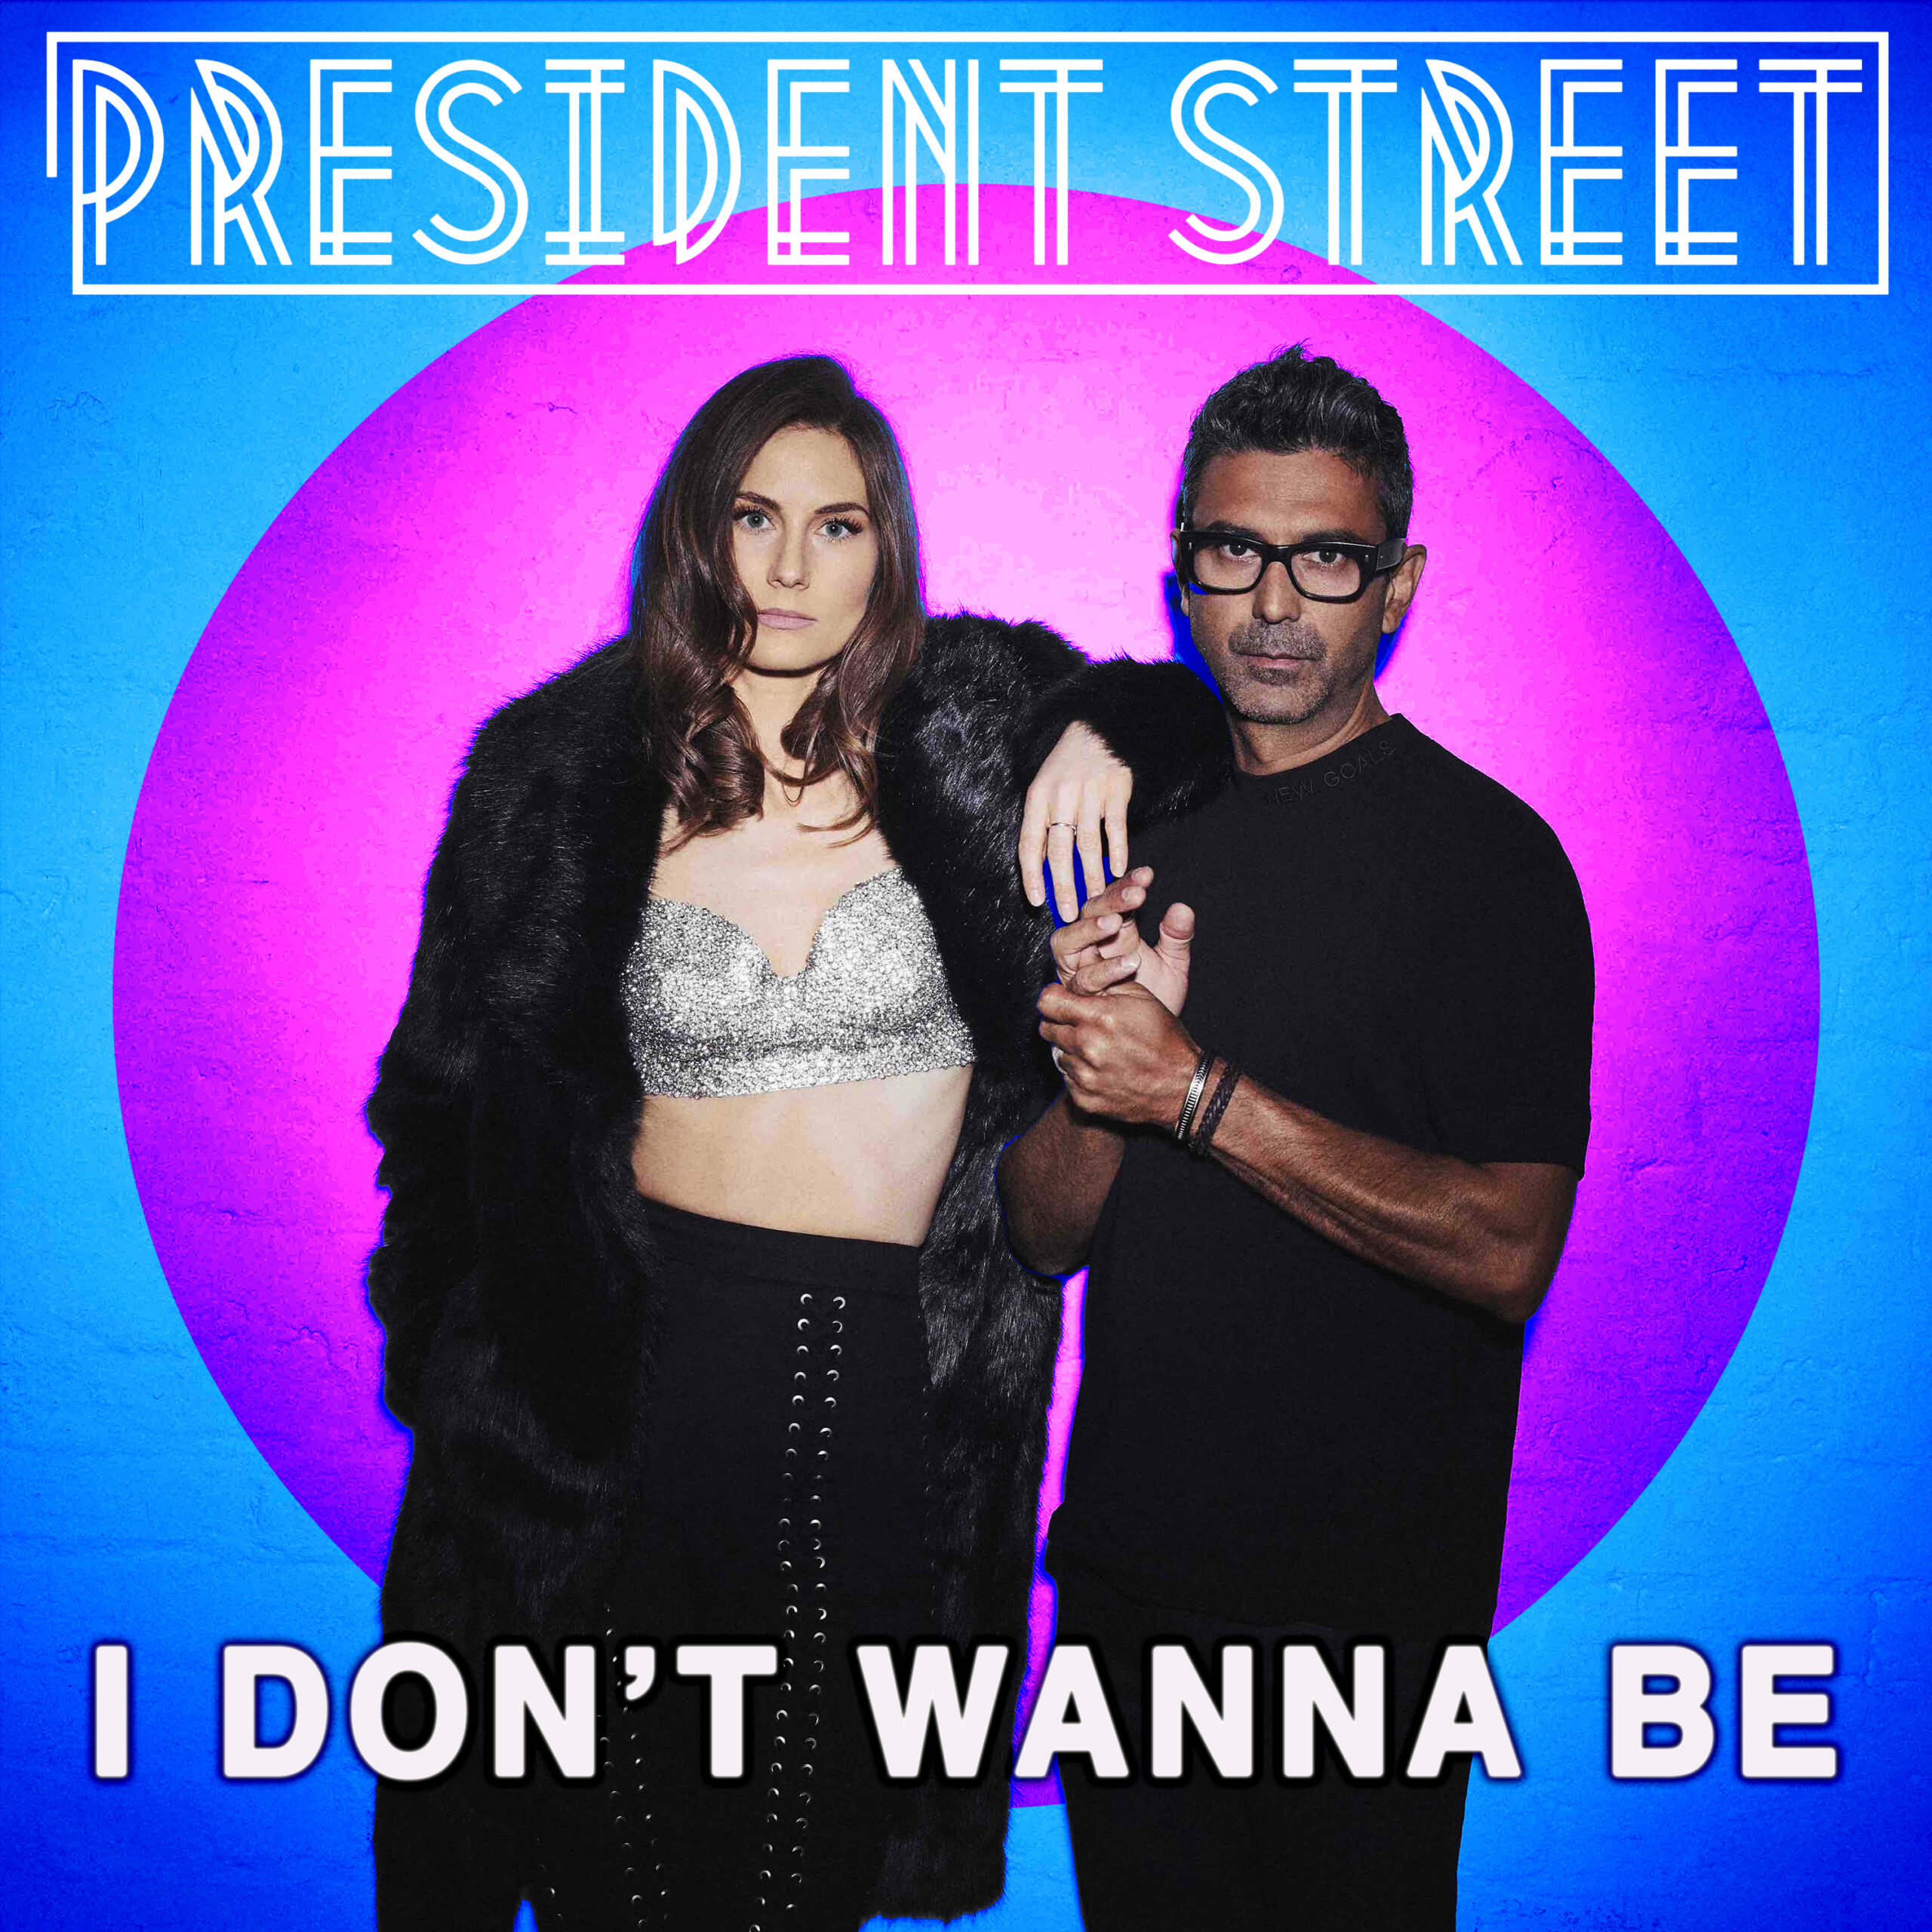 I DONT WANNA BE BY PRESIDENT STREET ARTWORK